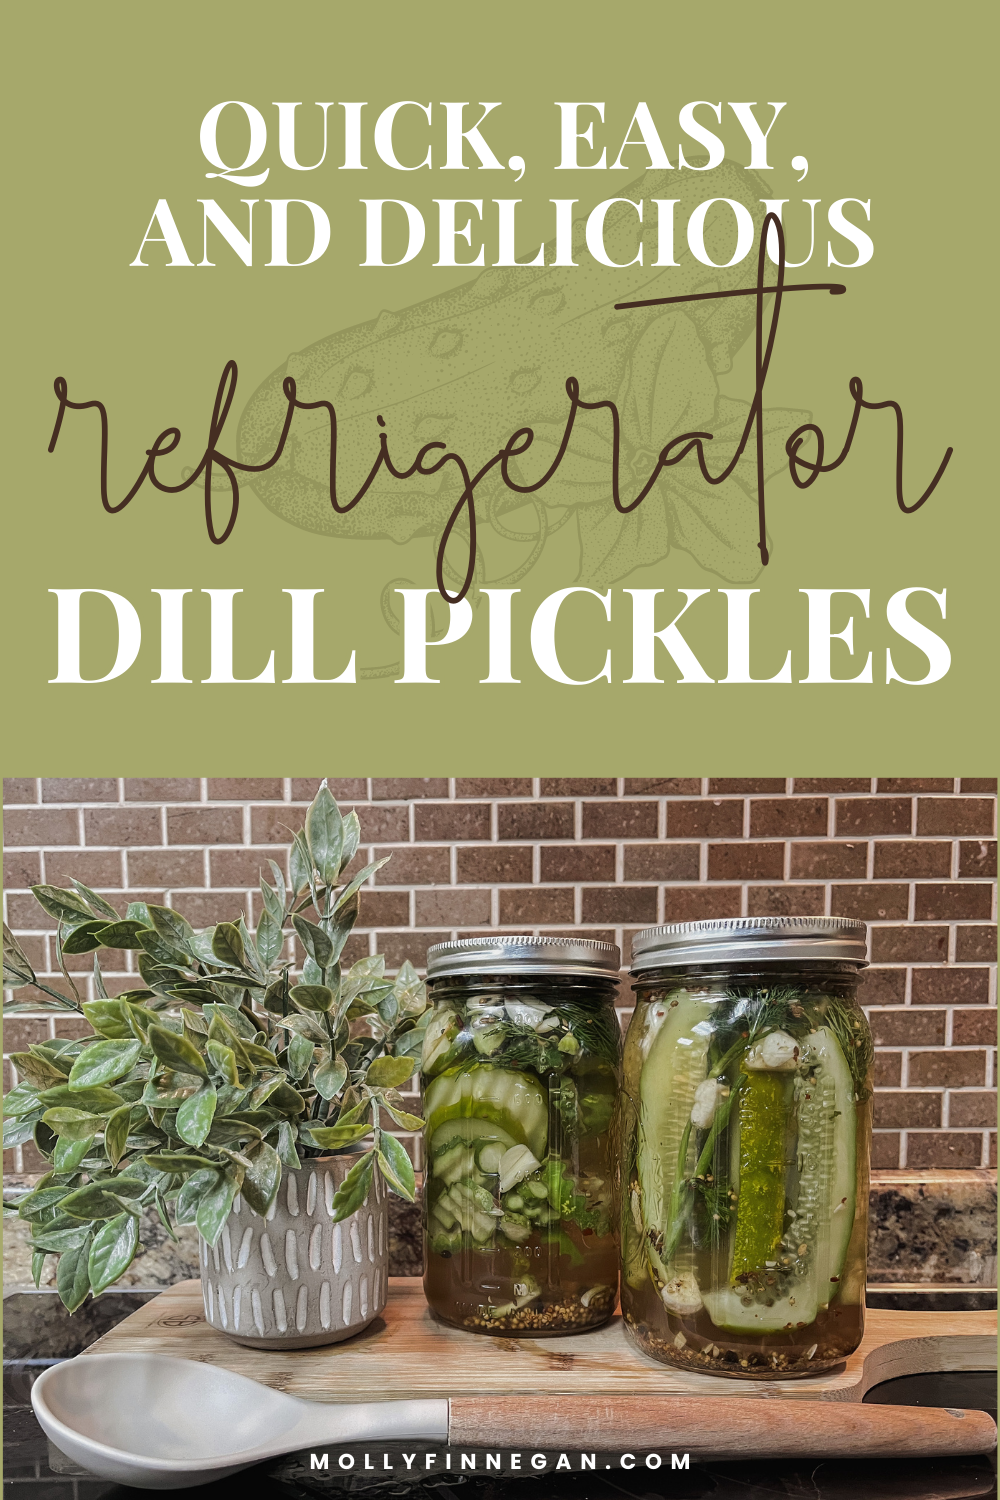 On top half, Quick, Easy, & Delicious Refrigerator Dill Pickles text overlayed on a clipart pickle. On bottom half, two jars of freshly made pickles next to a plant on wooden cutting board